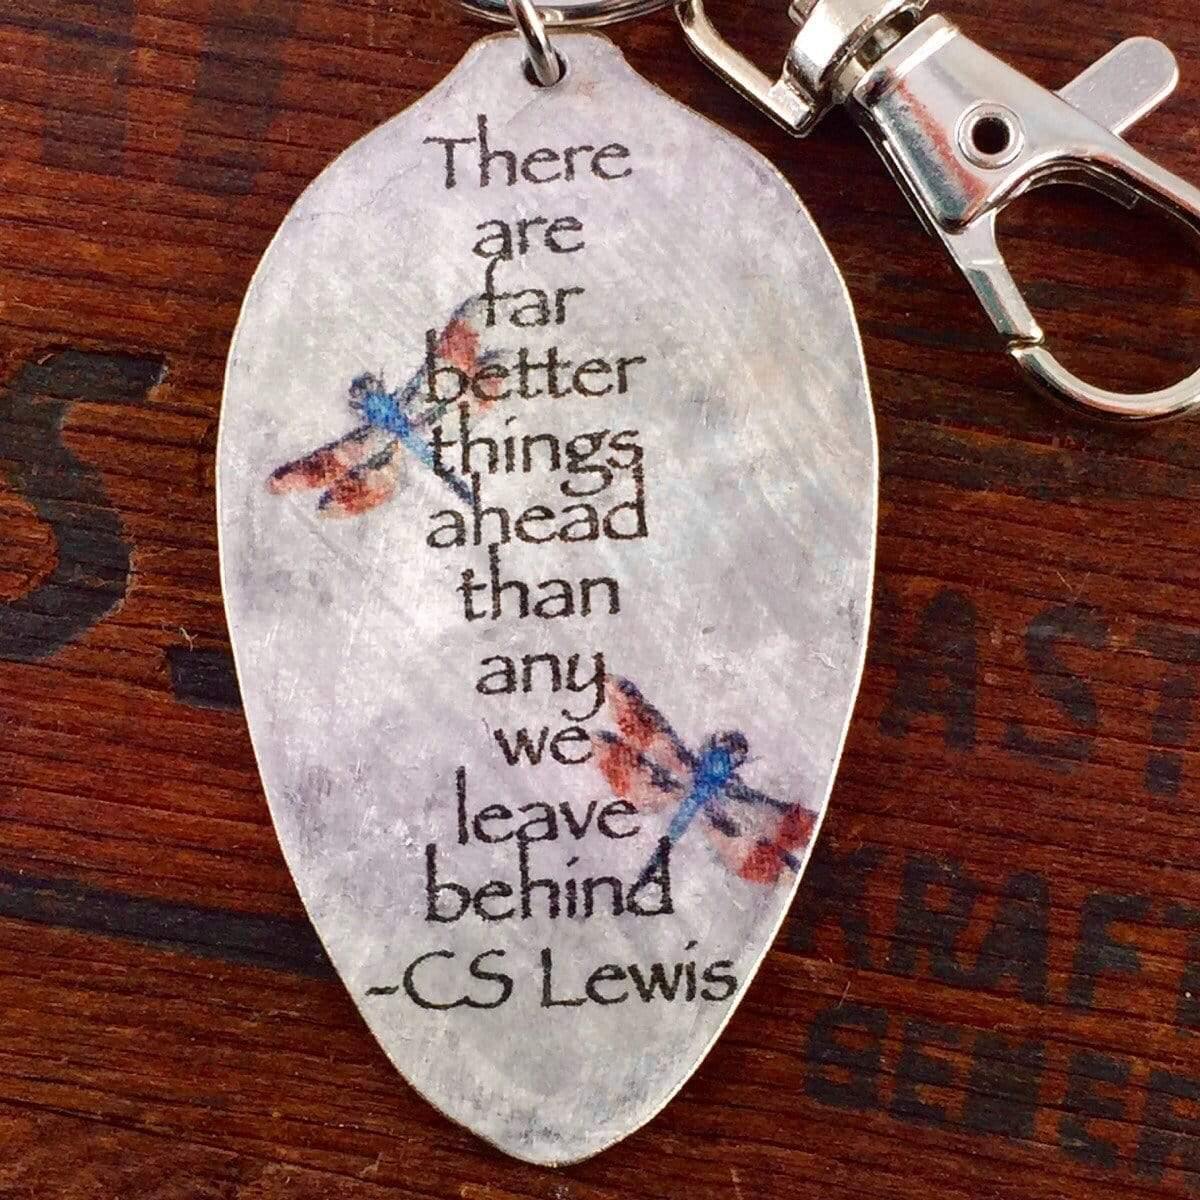 CS Lewis There are far better things ahead than any we leave behind Keychain, Inspiring Gift for Women, Silverware Jewelry - KyleeMae Designs